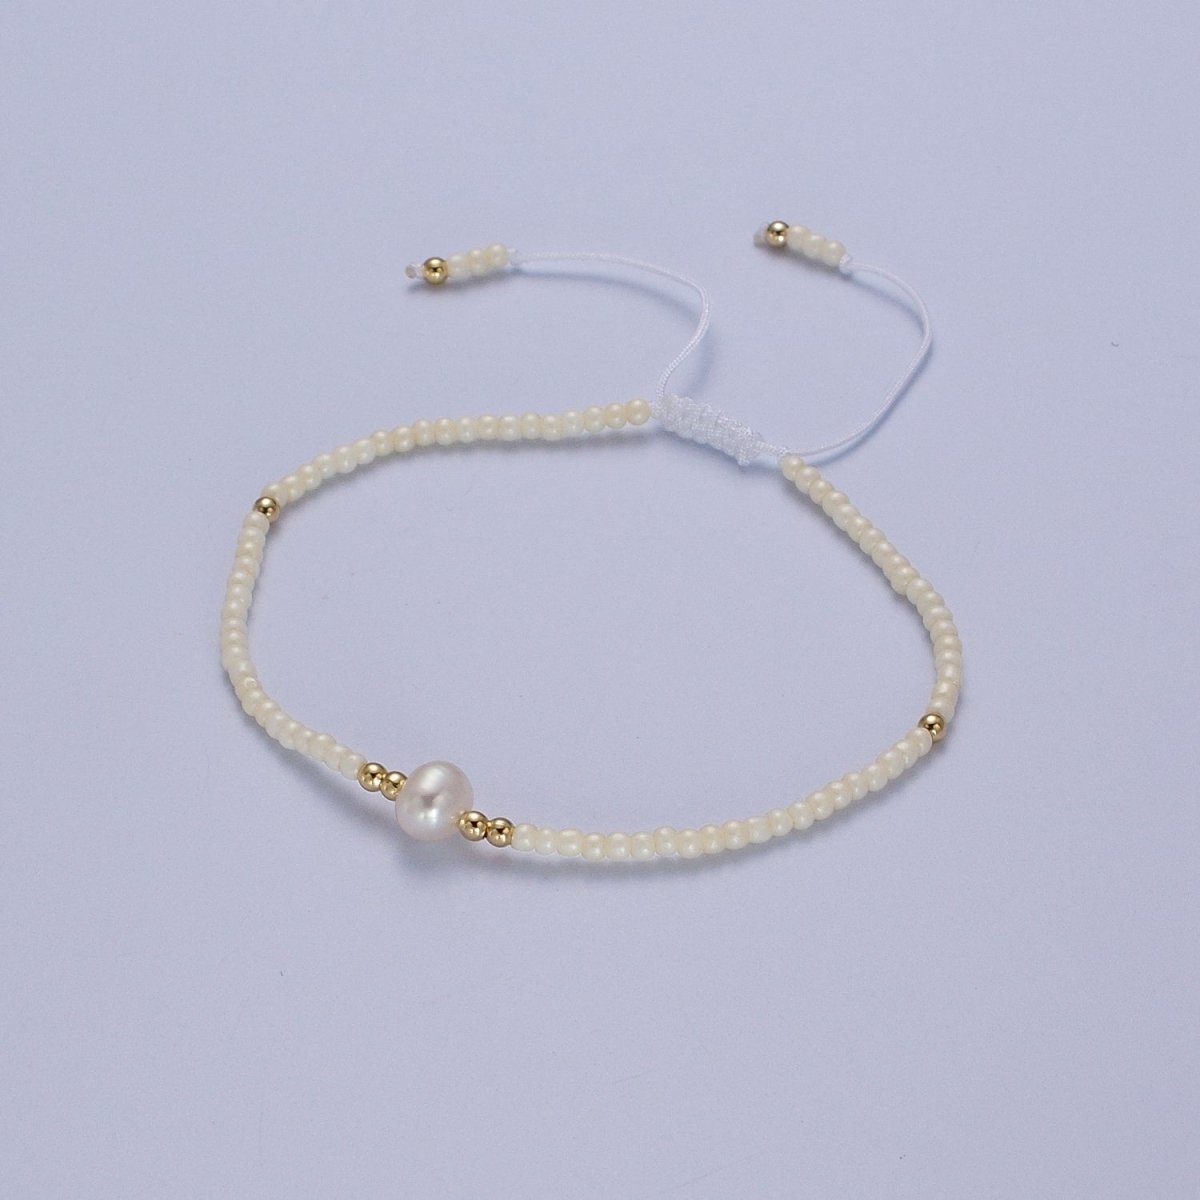 Handmade Pearl Glass Beads Knotted Adjustable Bracelet | WA-1258 - WA-1264 Clearance Pricing - DLUXCA